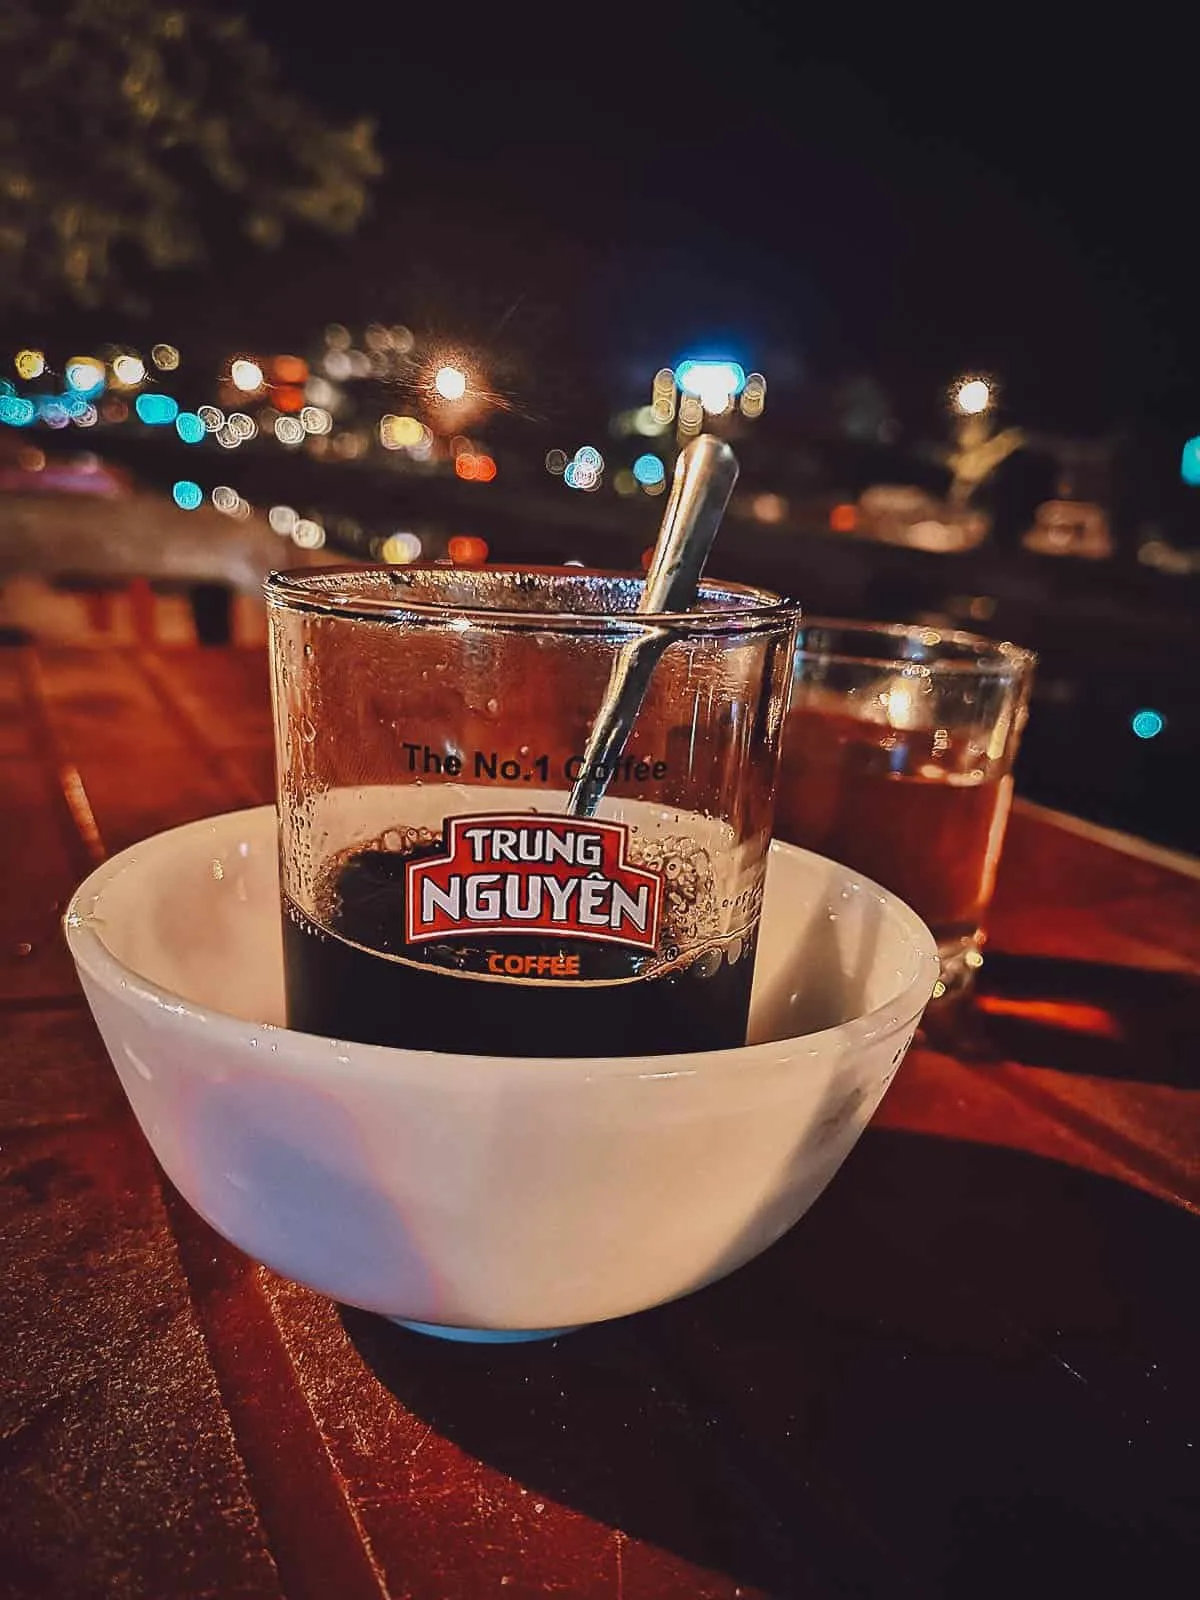 Black coffee by the river in Hoi An, Vietnam